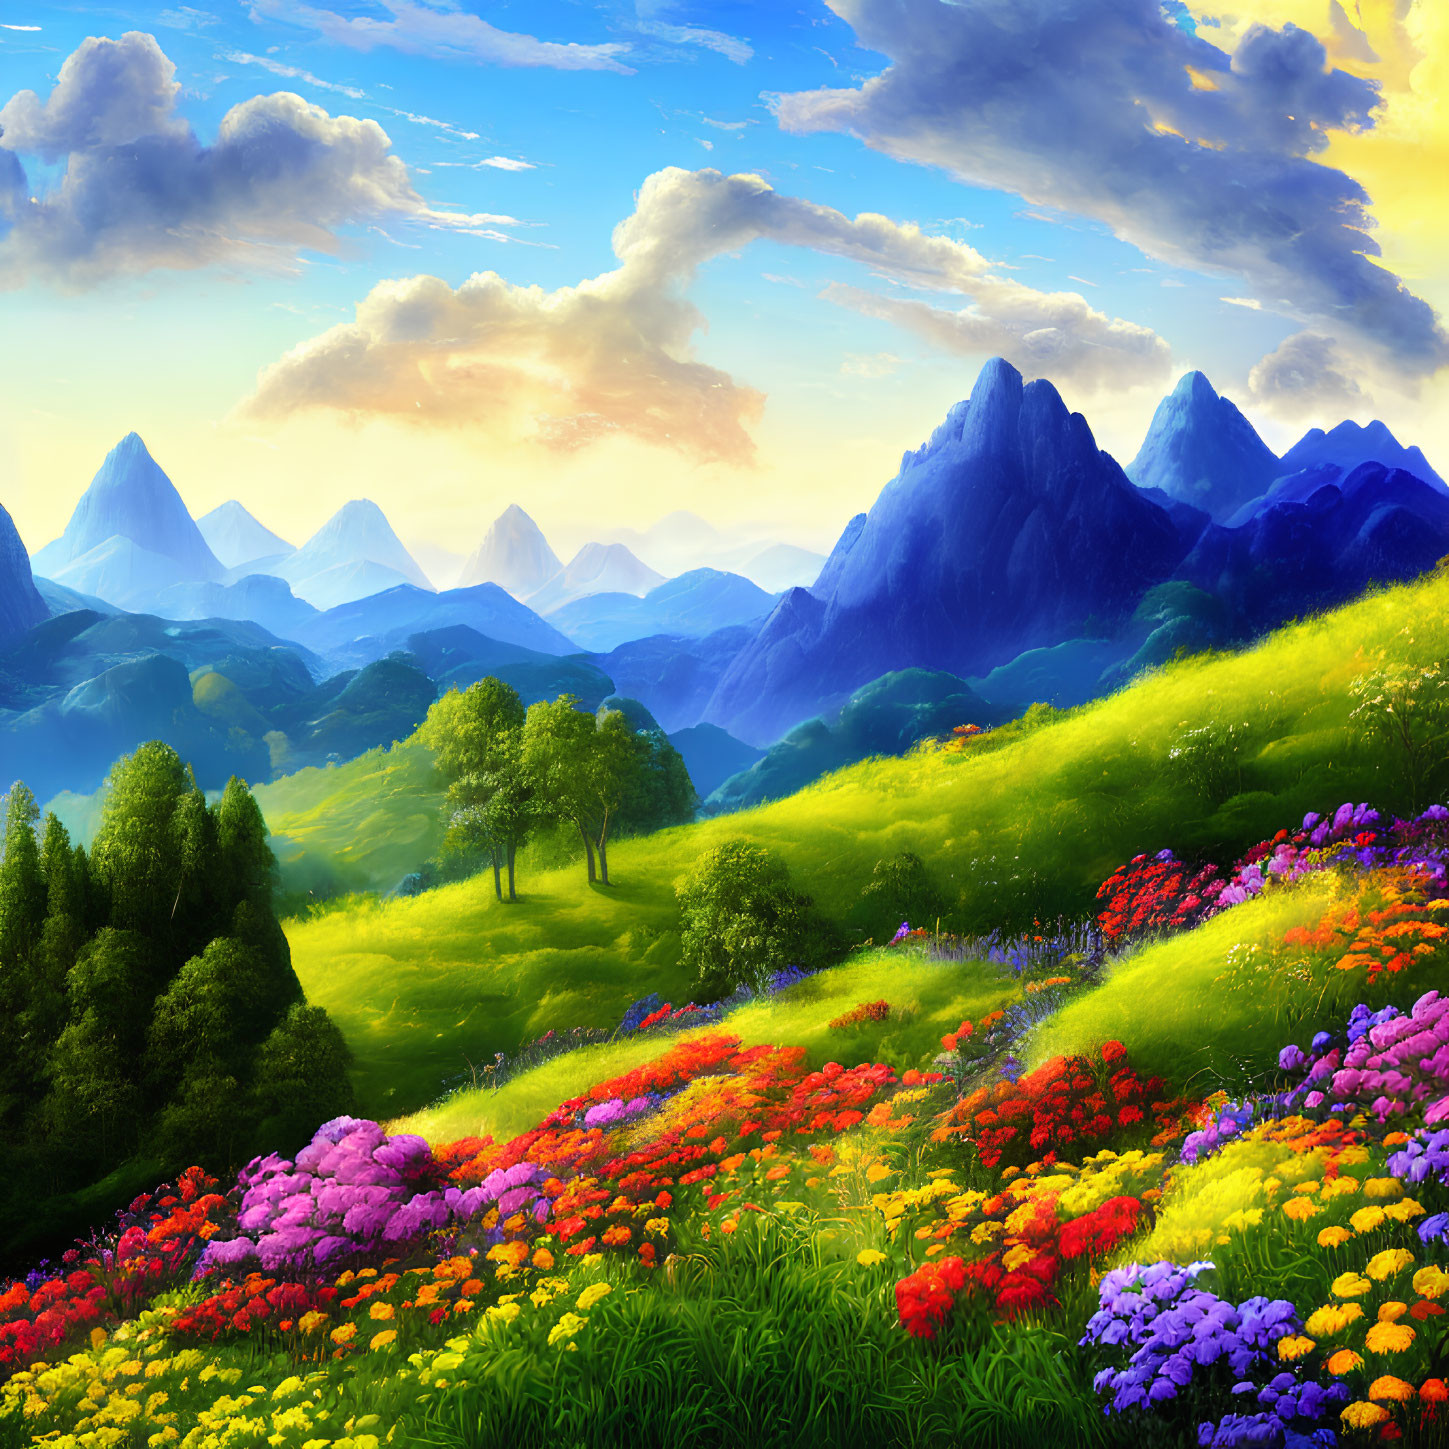 Colorful Wildflowers Cover Rolling Hills and Misty Mountains under Blue Sky